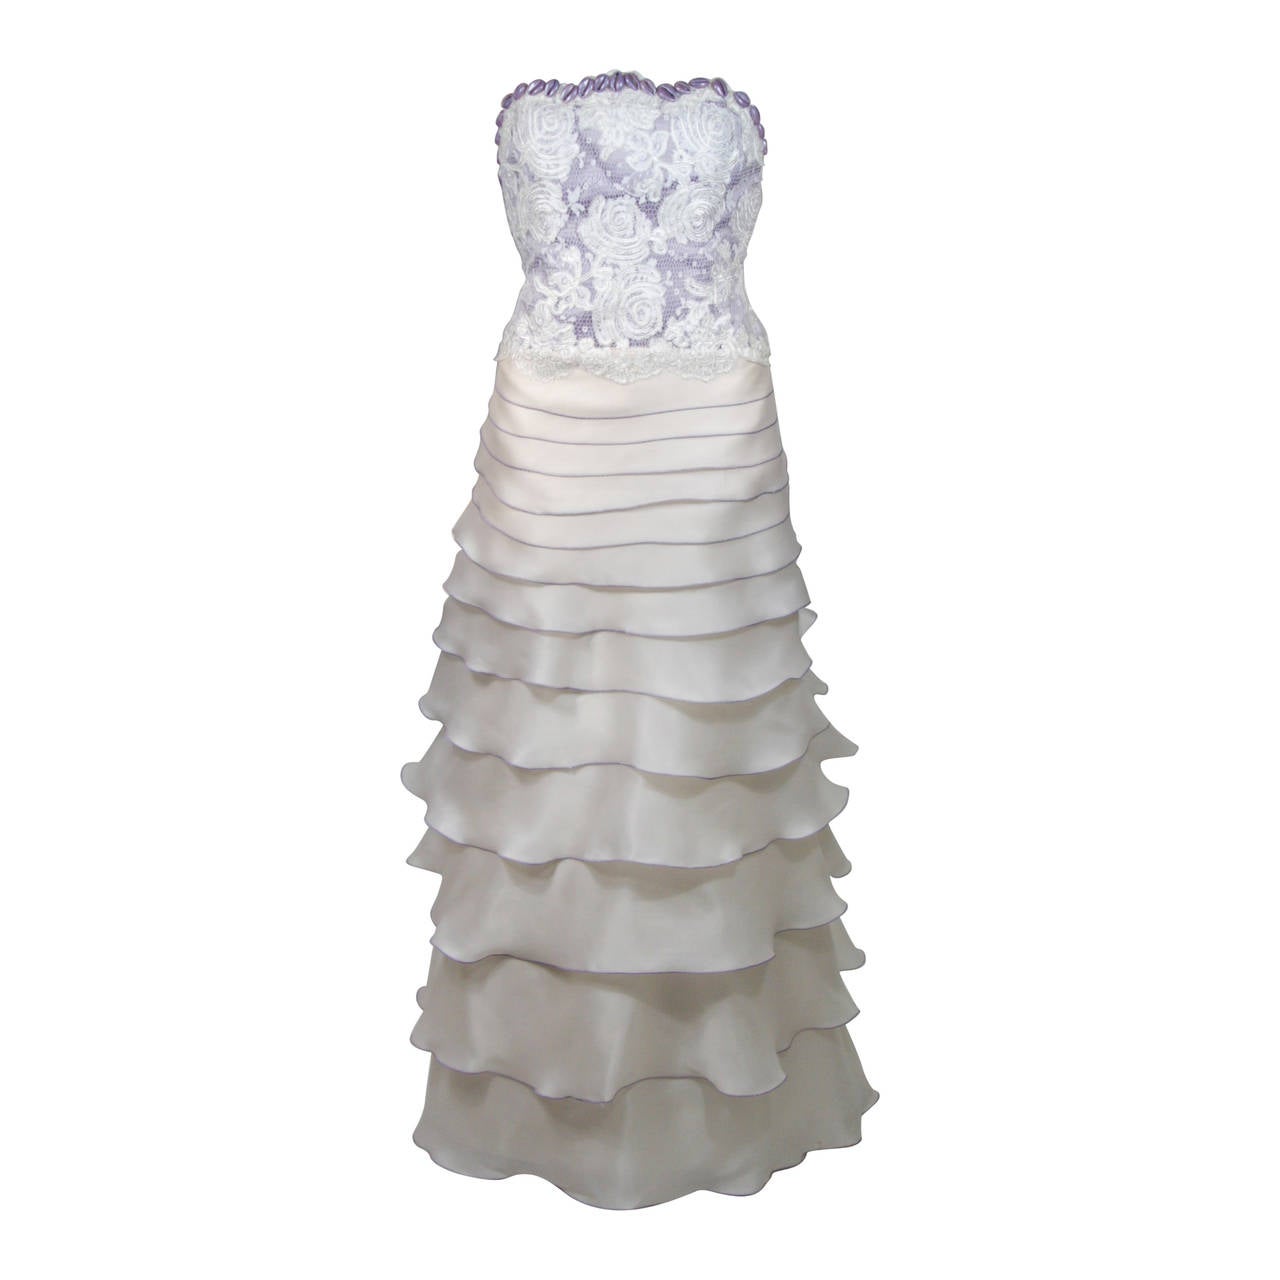 Rutina Wesley's Lavender & Cream Paul Campbell Couture Wedding Gown circa 2005 For Sale